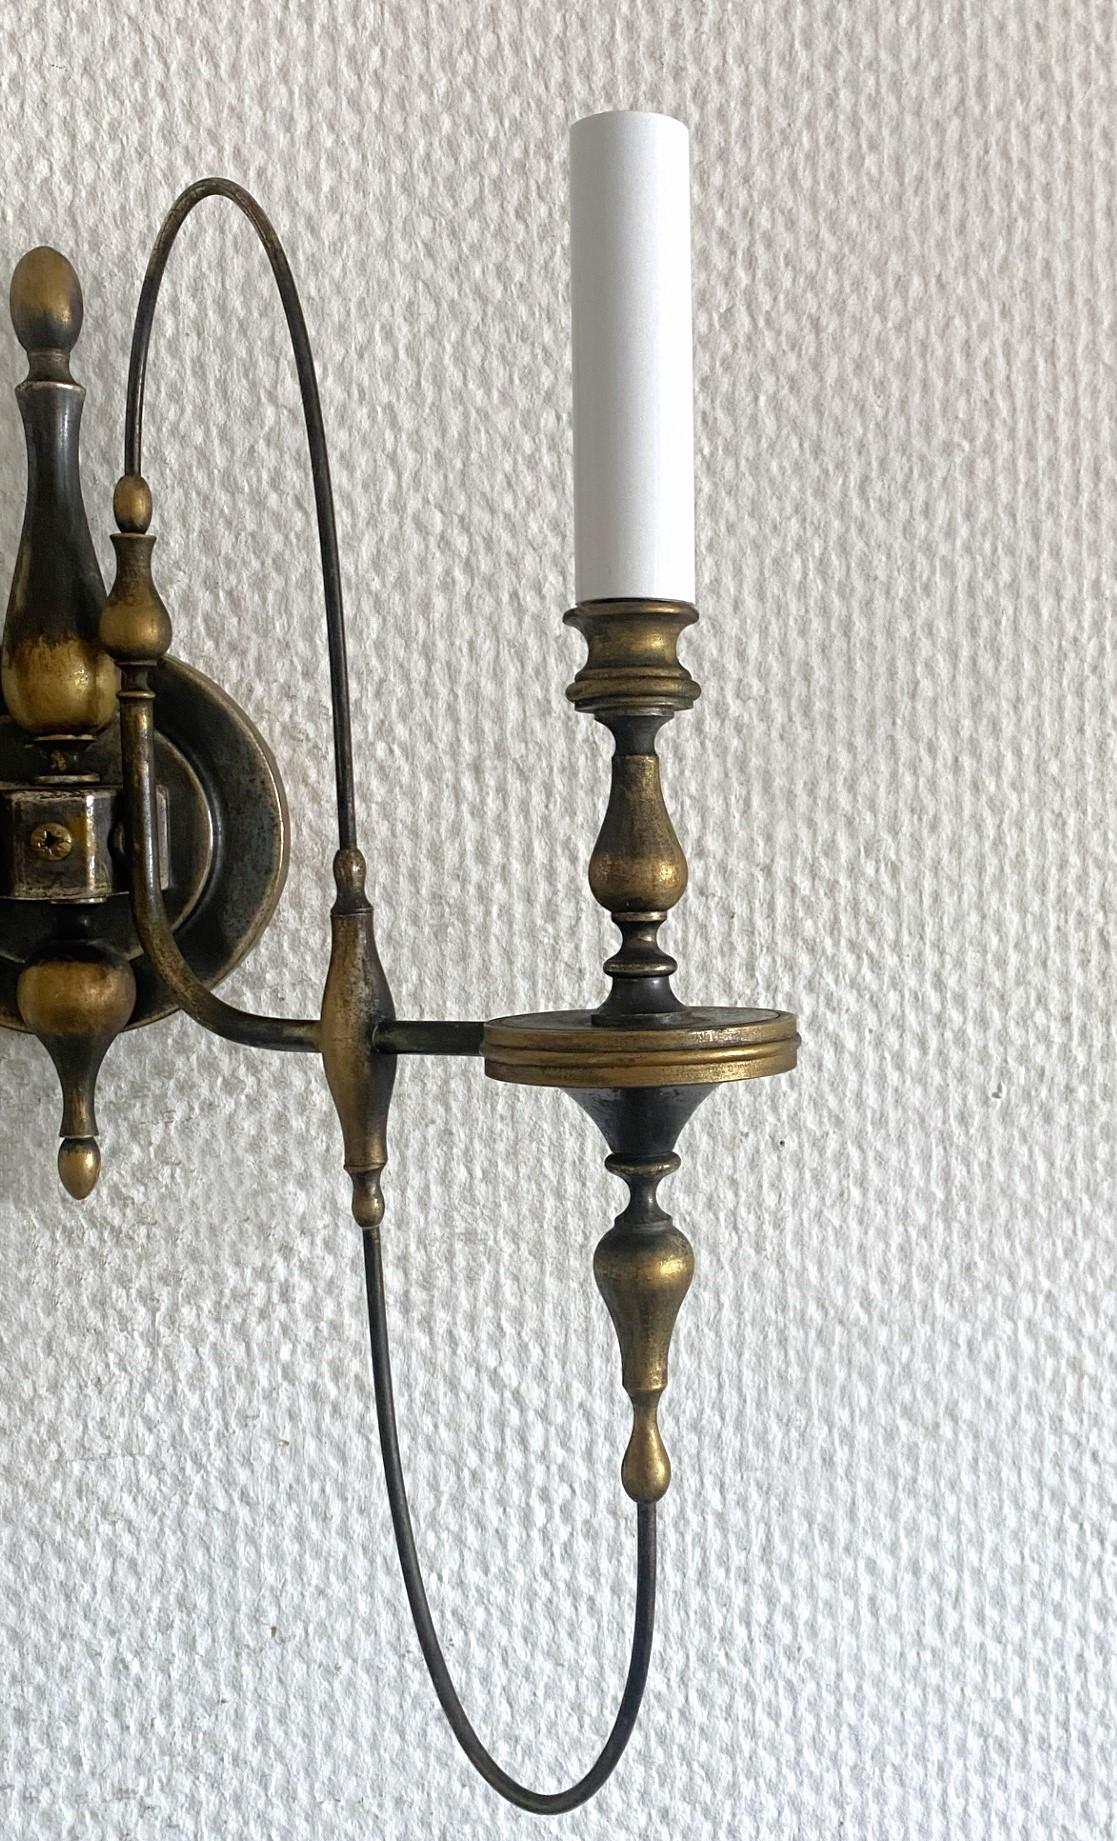 Rare Pair of Italian Brass Wall Sconces by Gaetano Sciolari, Italy 1950s, Marked For Sale 2